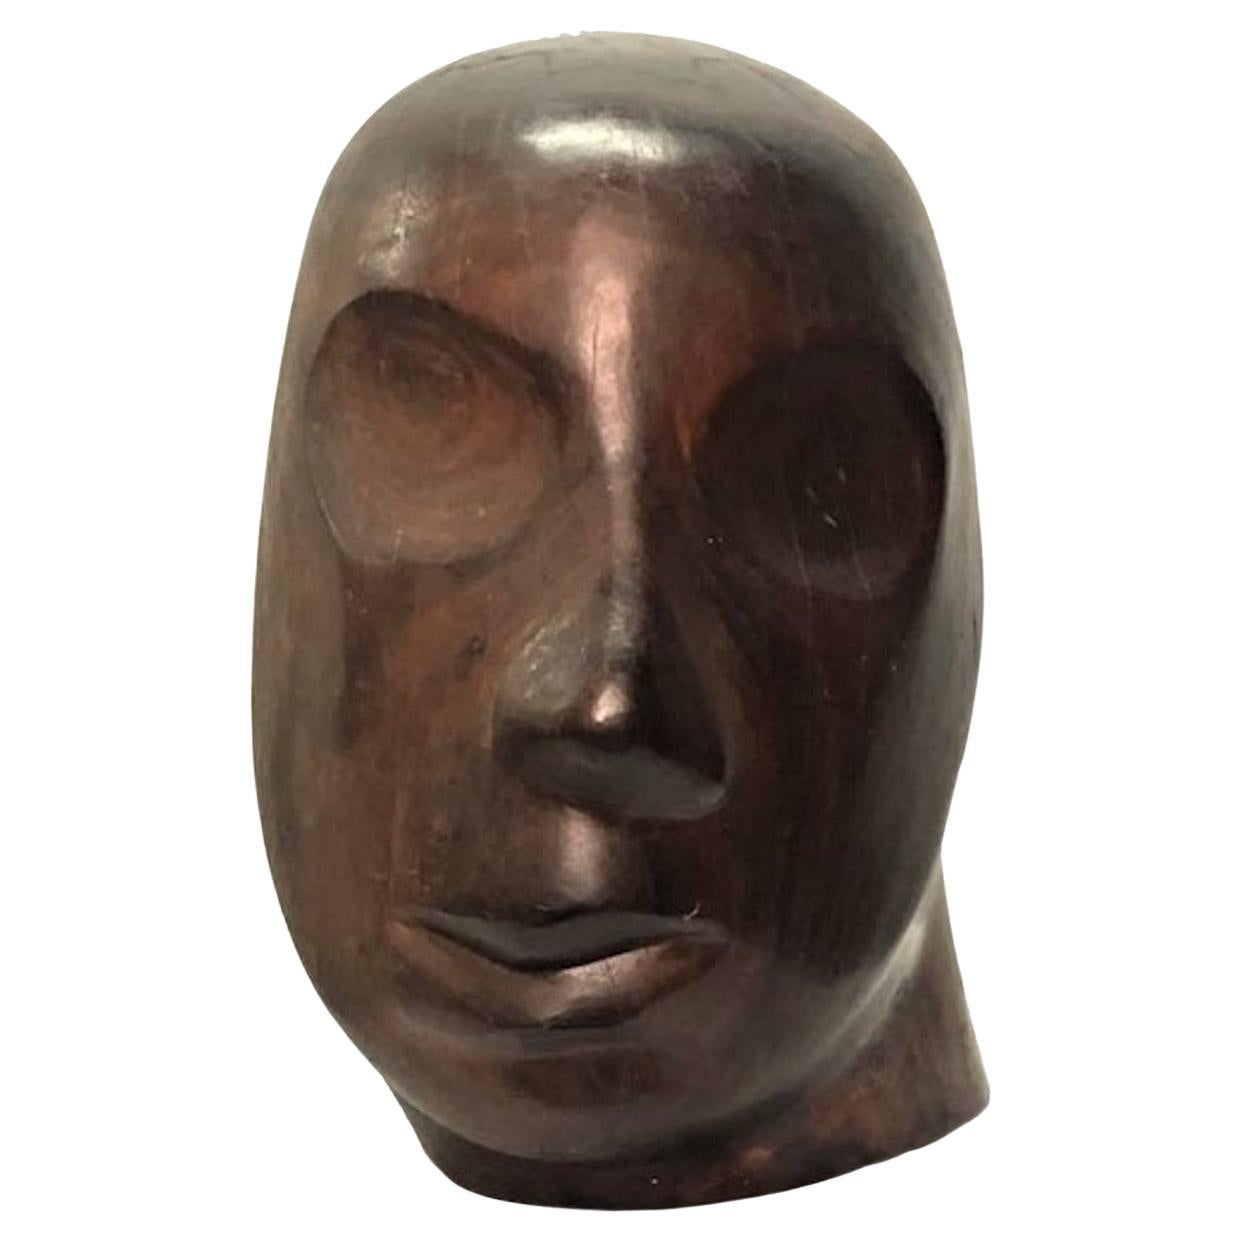 Head, French Modernist Hand-Carved Wood Sculpture, ca. 1950